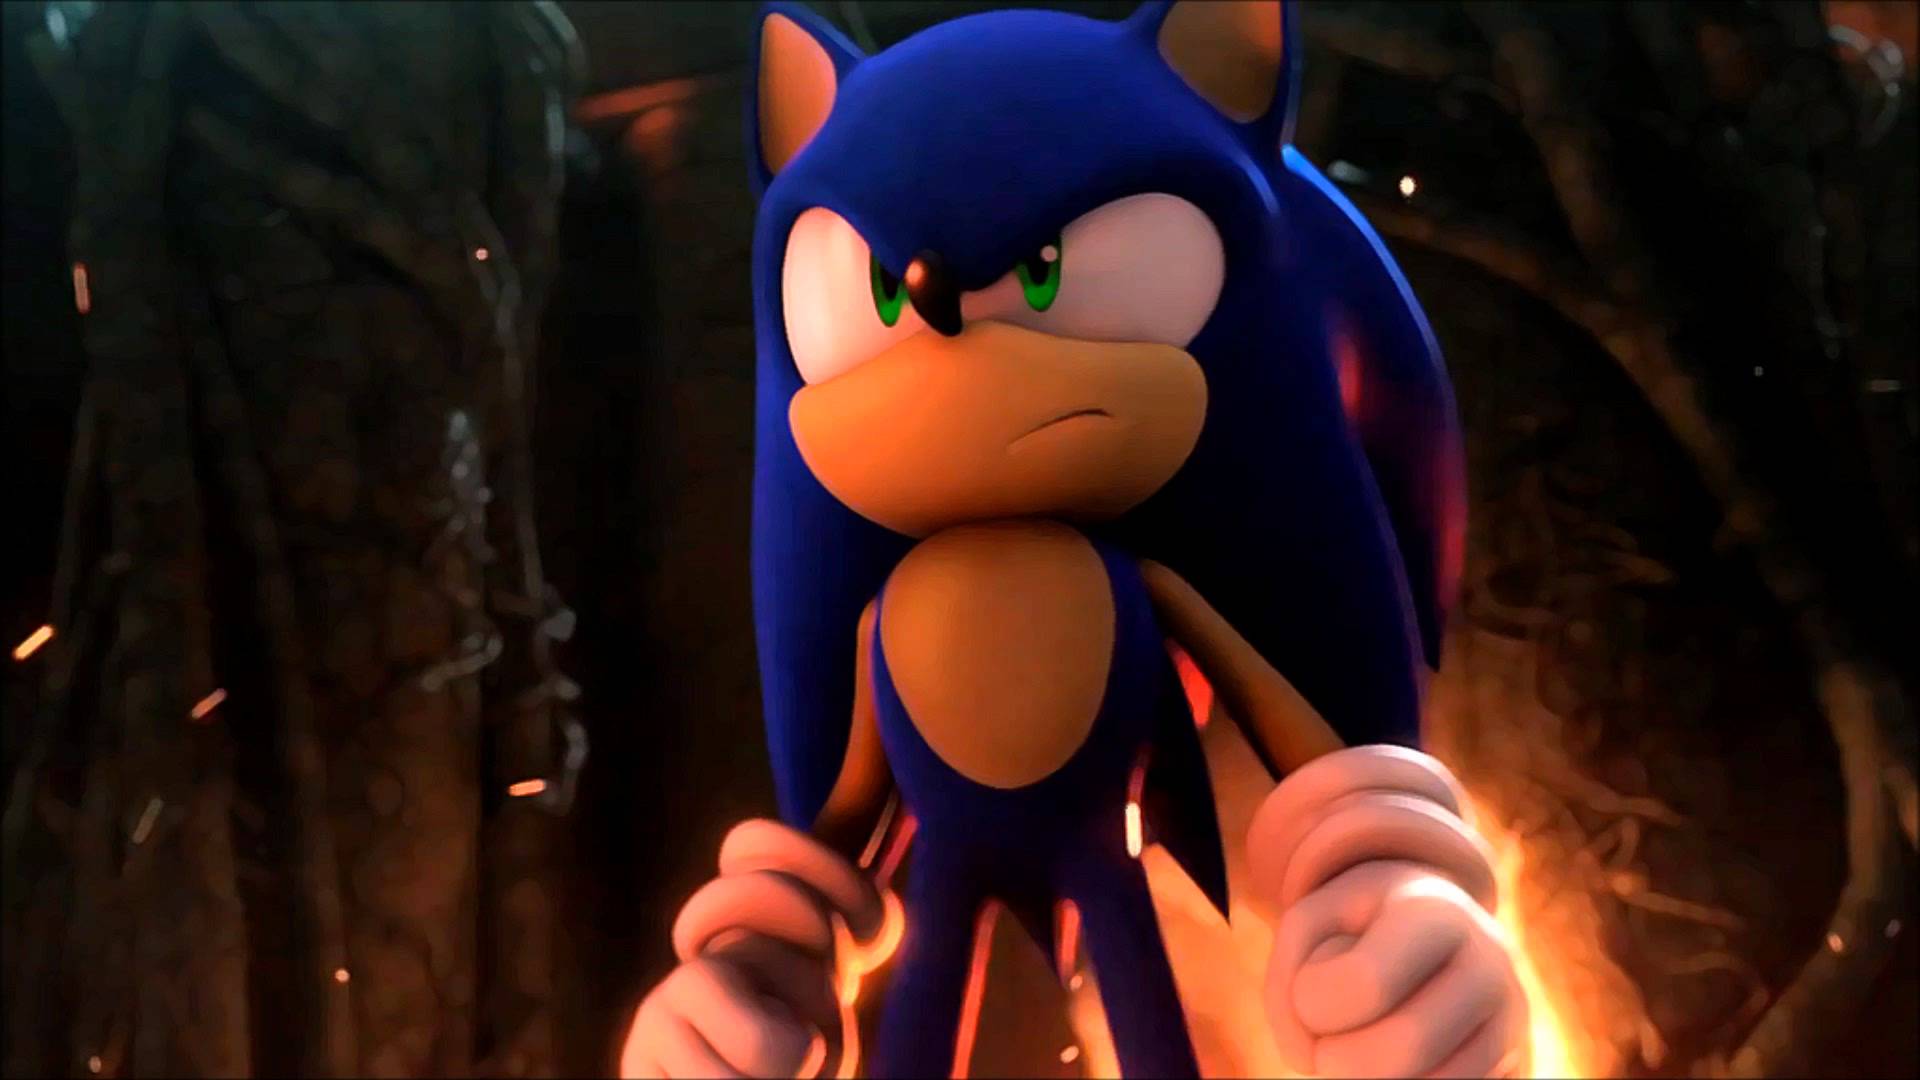 Sonic the Hedgehog epic HD Wallpaper. Background Imagex1080